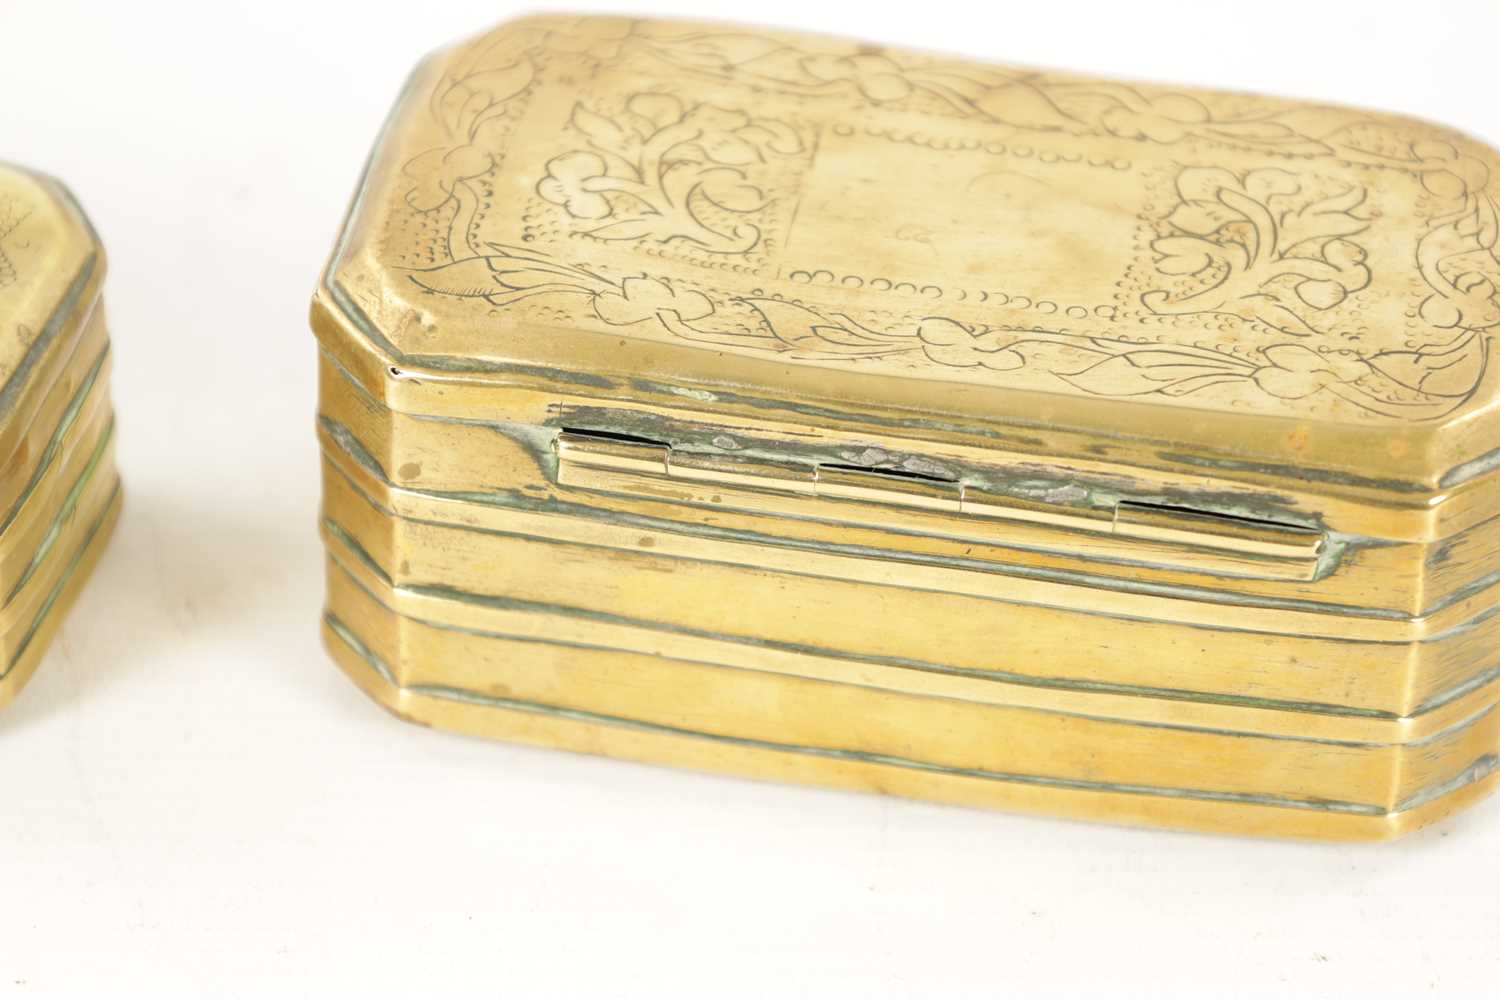 TWO 18TH CENTURY BRASS TOBACCO/SNUFF BOXES - Image 6 of 9